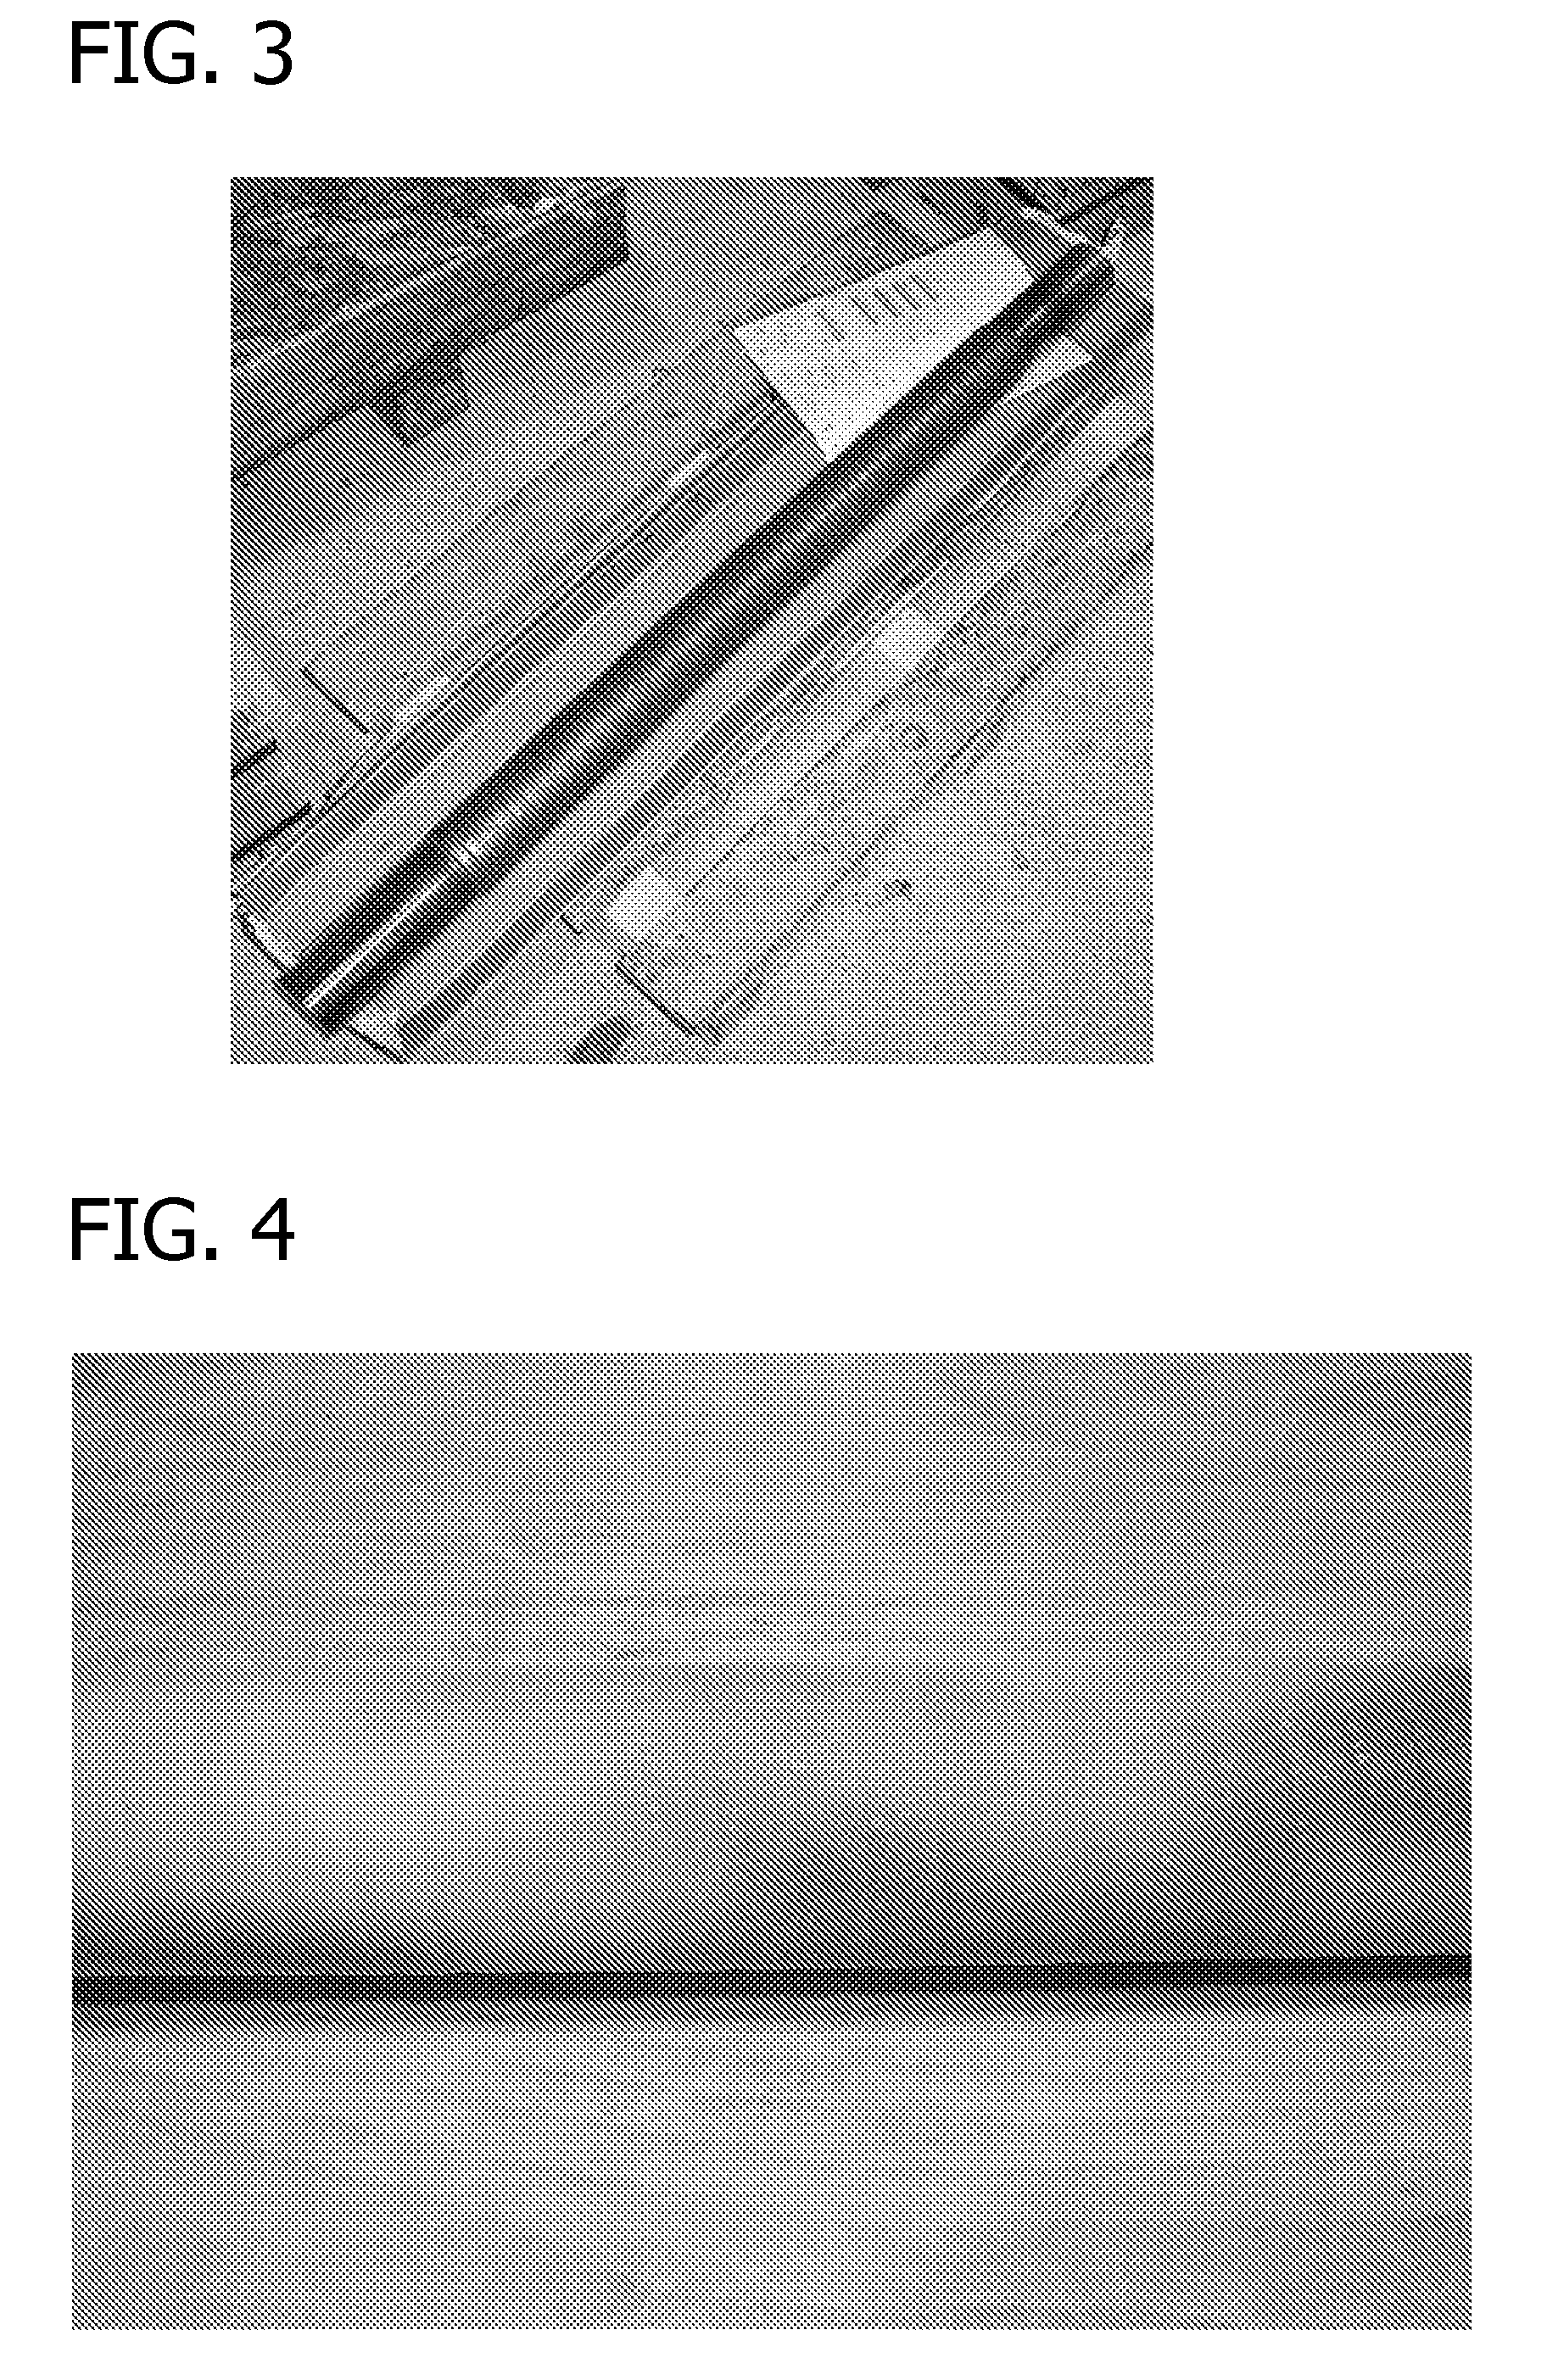 Weldable, crack-resistant co-based alloy and overlay method